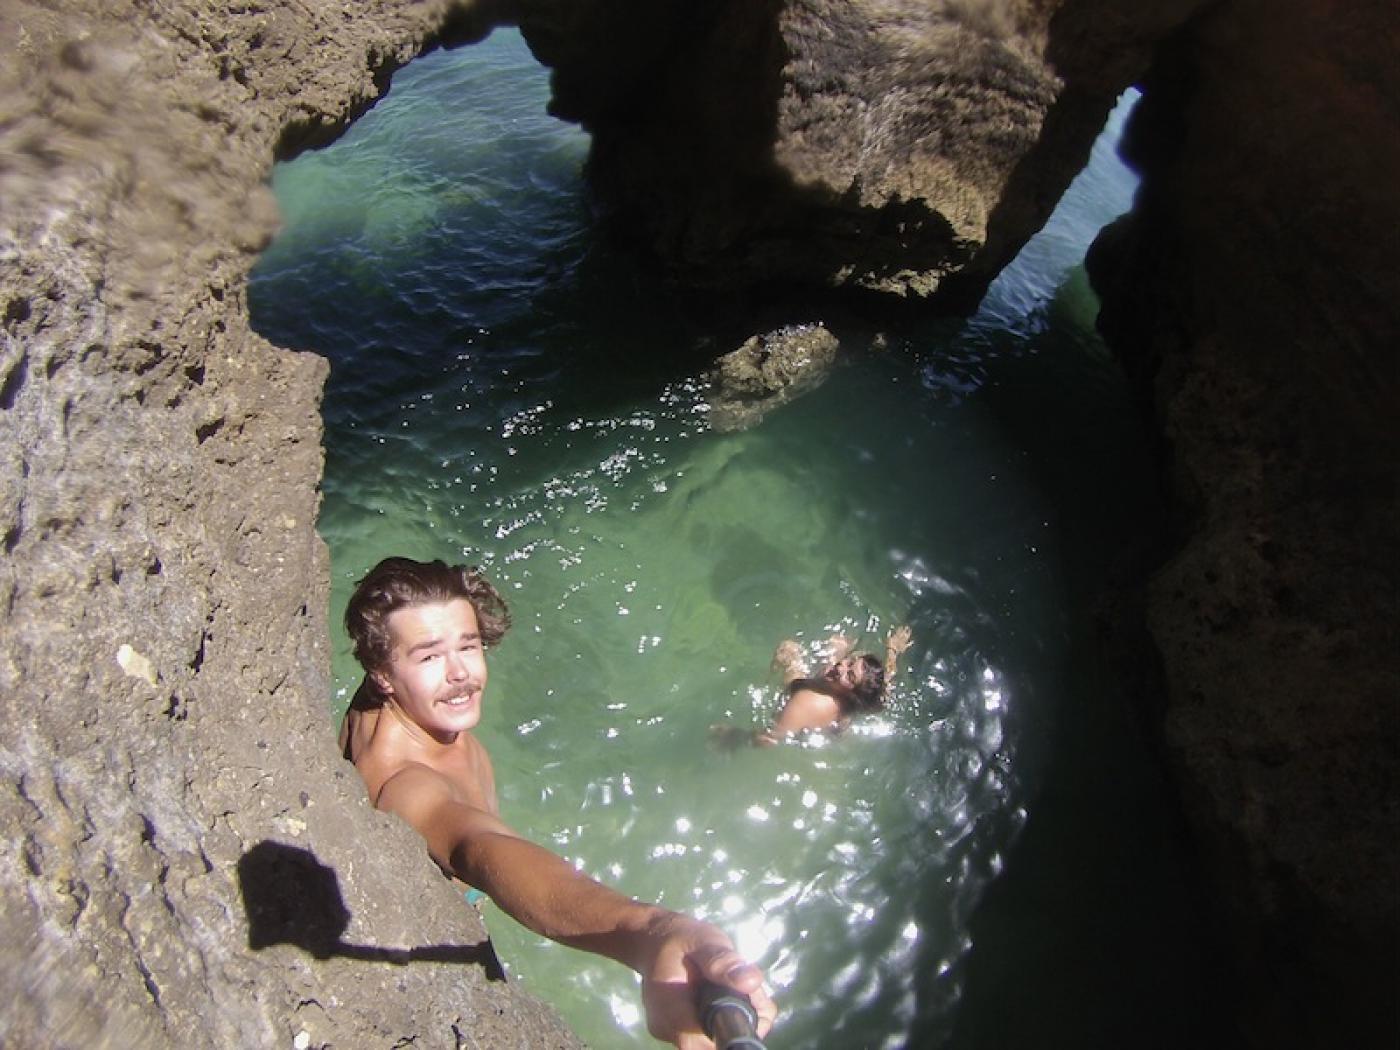 Natalie and her boyfriend explore a grotto in Lagos, Portugal.